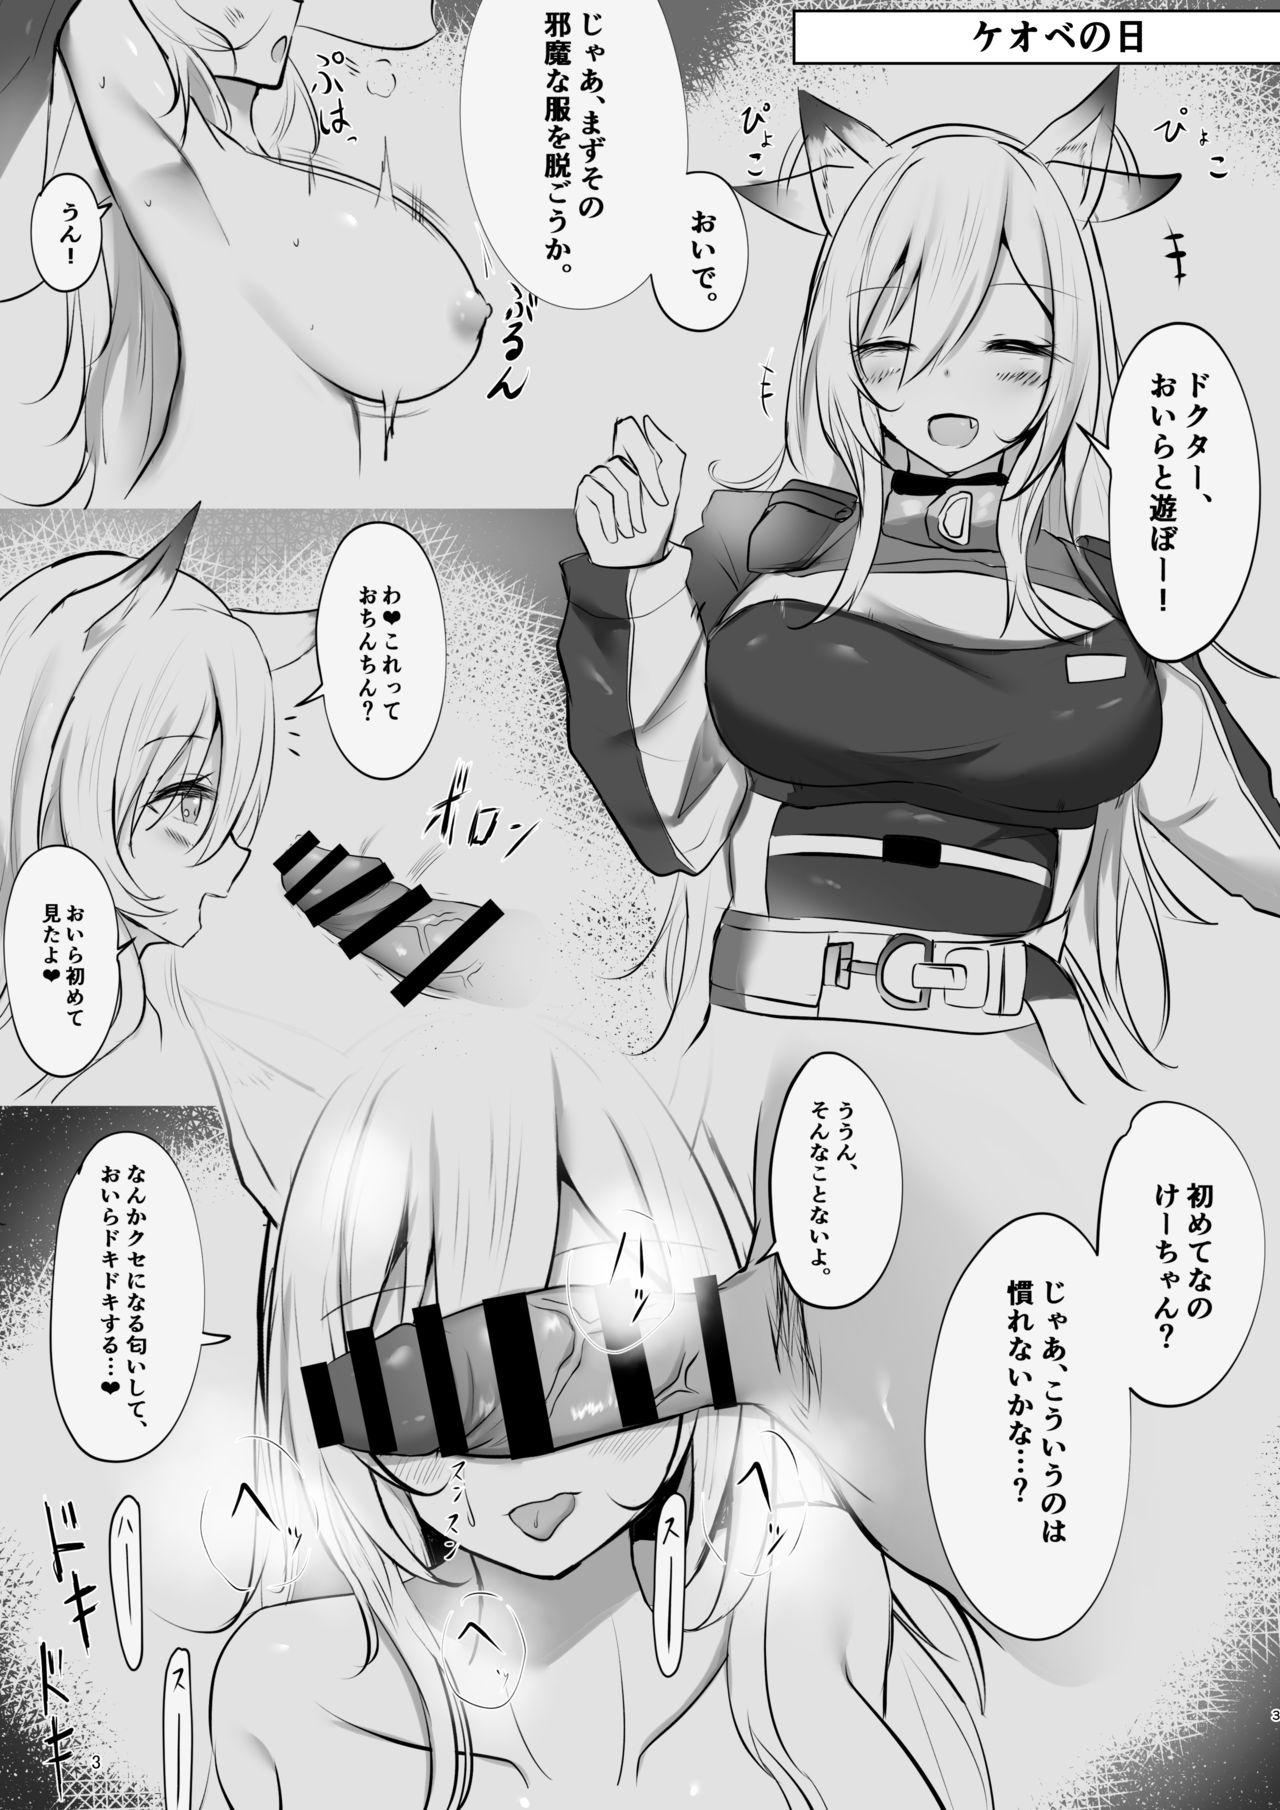 Free Amateur 夜な夜な扇情作戦記録 - Arknights Arabe - Page 3